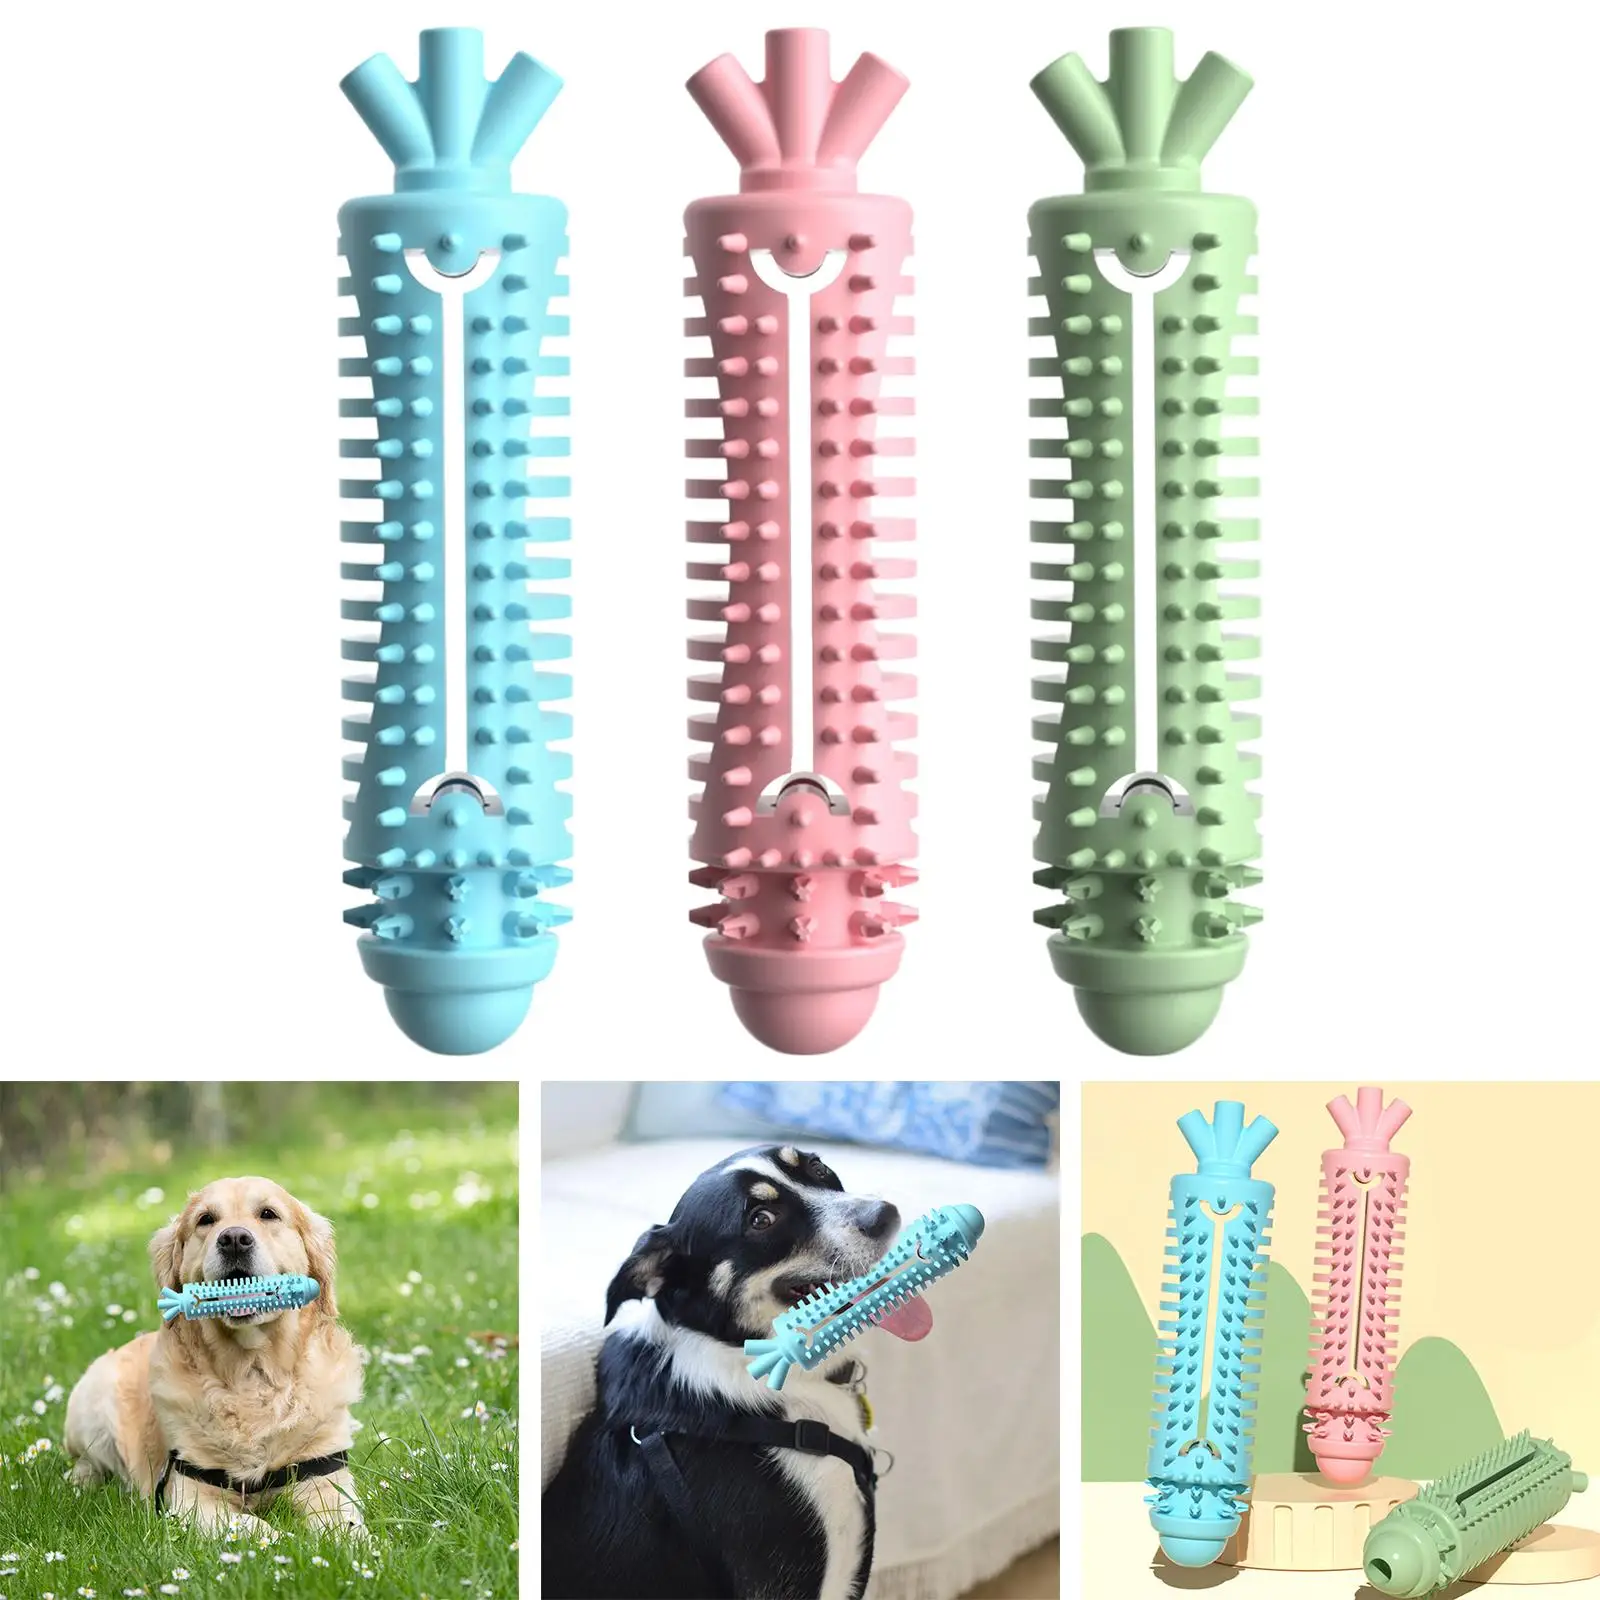 Dog Chew Toy Pet Interactive Toothbrush Travel Instinct Training Educational Toy Puppy Teething Toys for Small Medium Doggy